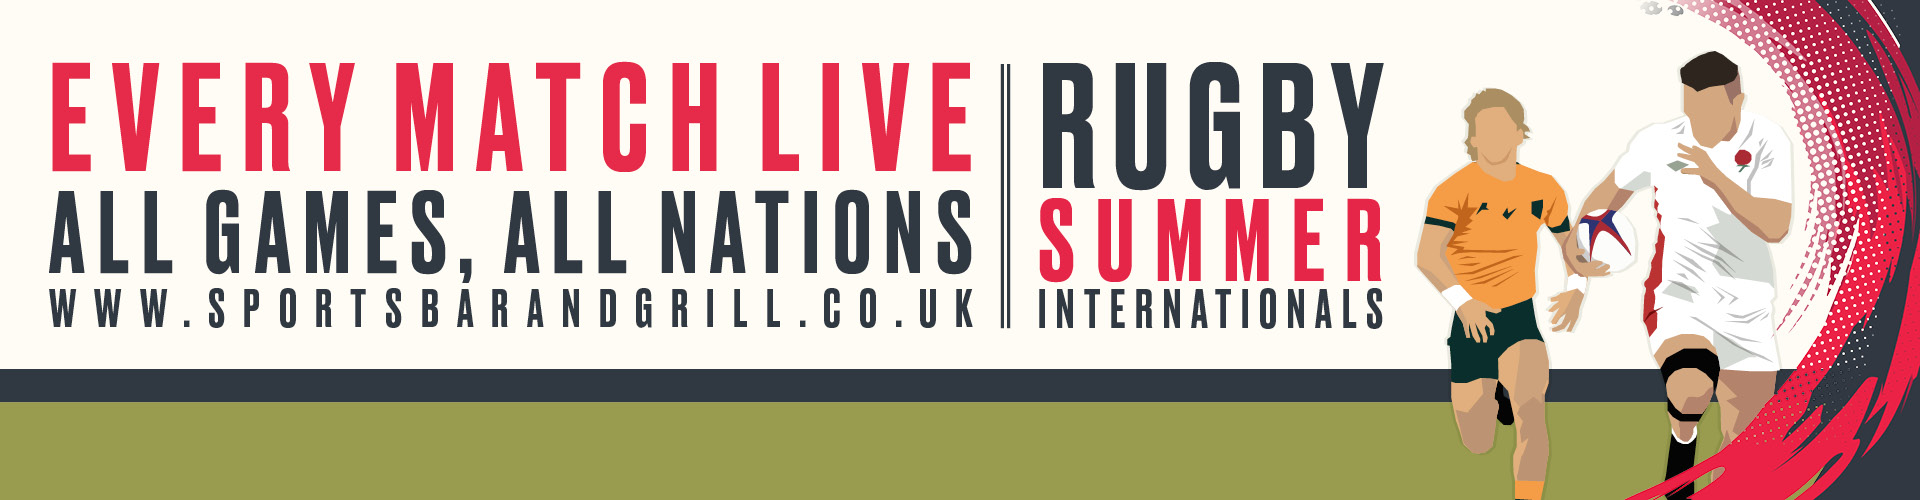 Every Match Live - All Games, All Nations - Rugby Summer Internatonals